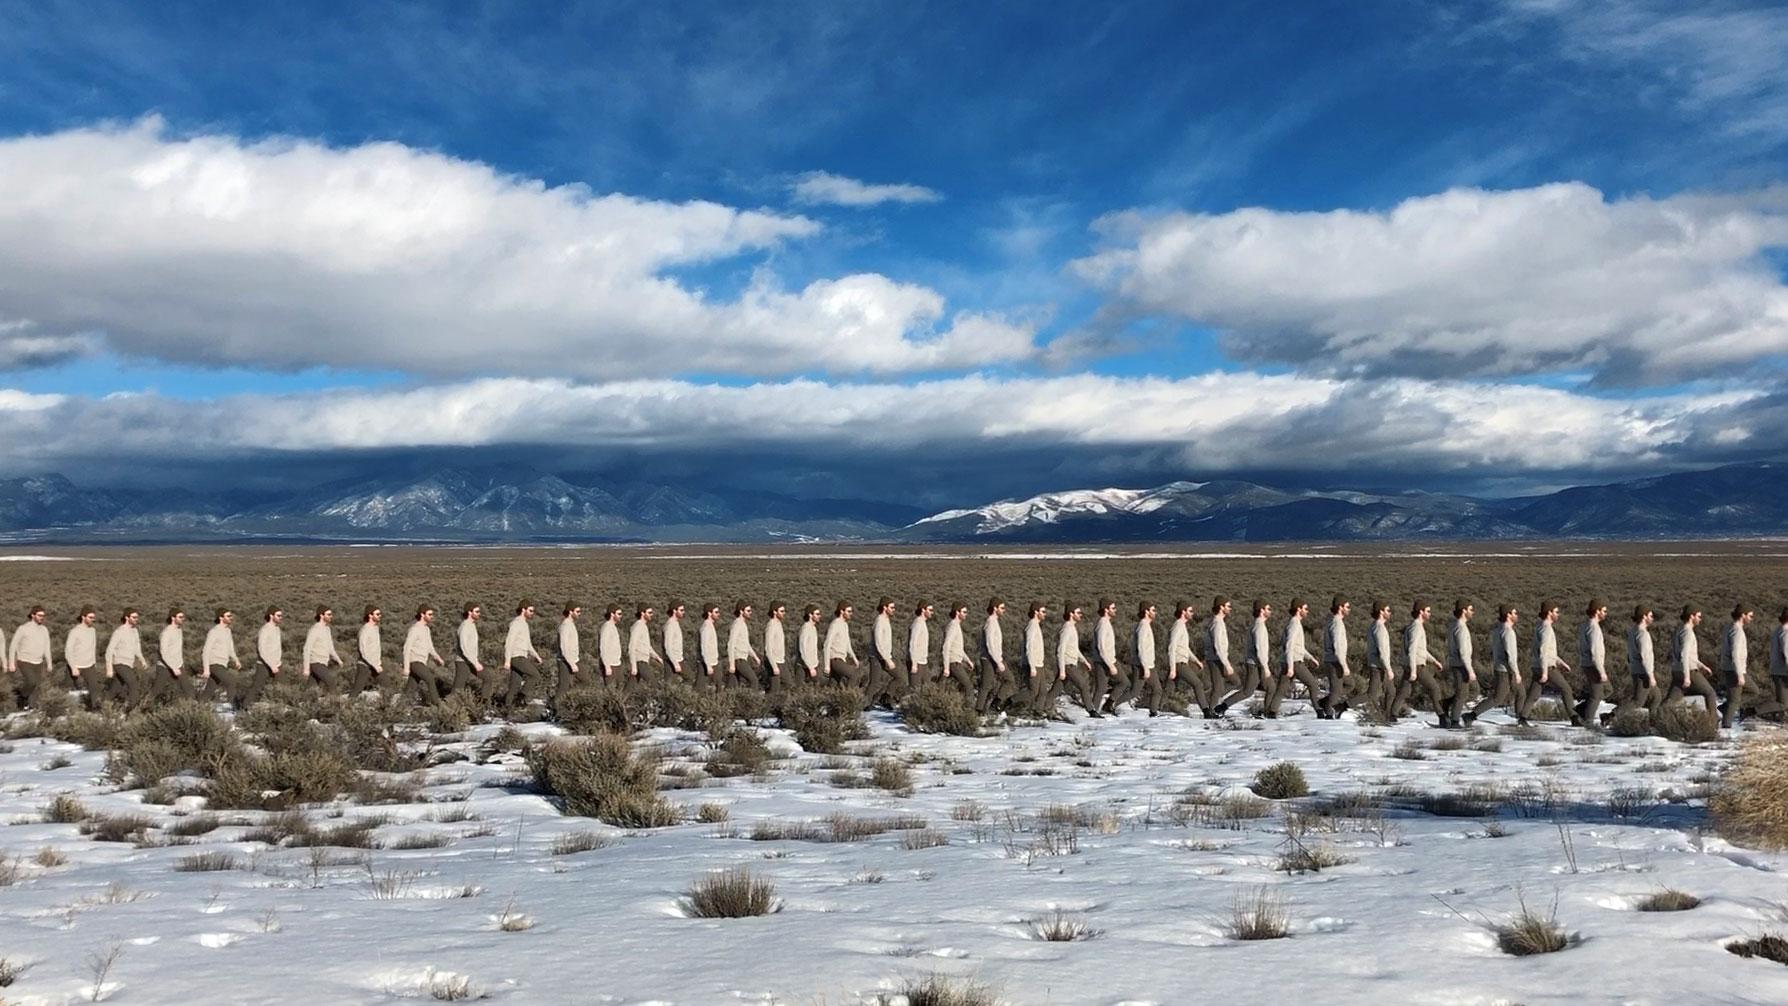 "Walking Line in New Mexico" - Figurative Landscape Photography - Goldsworthy